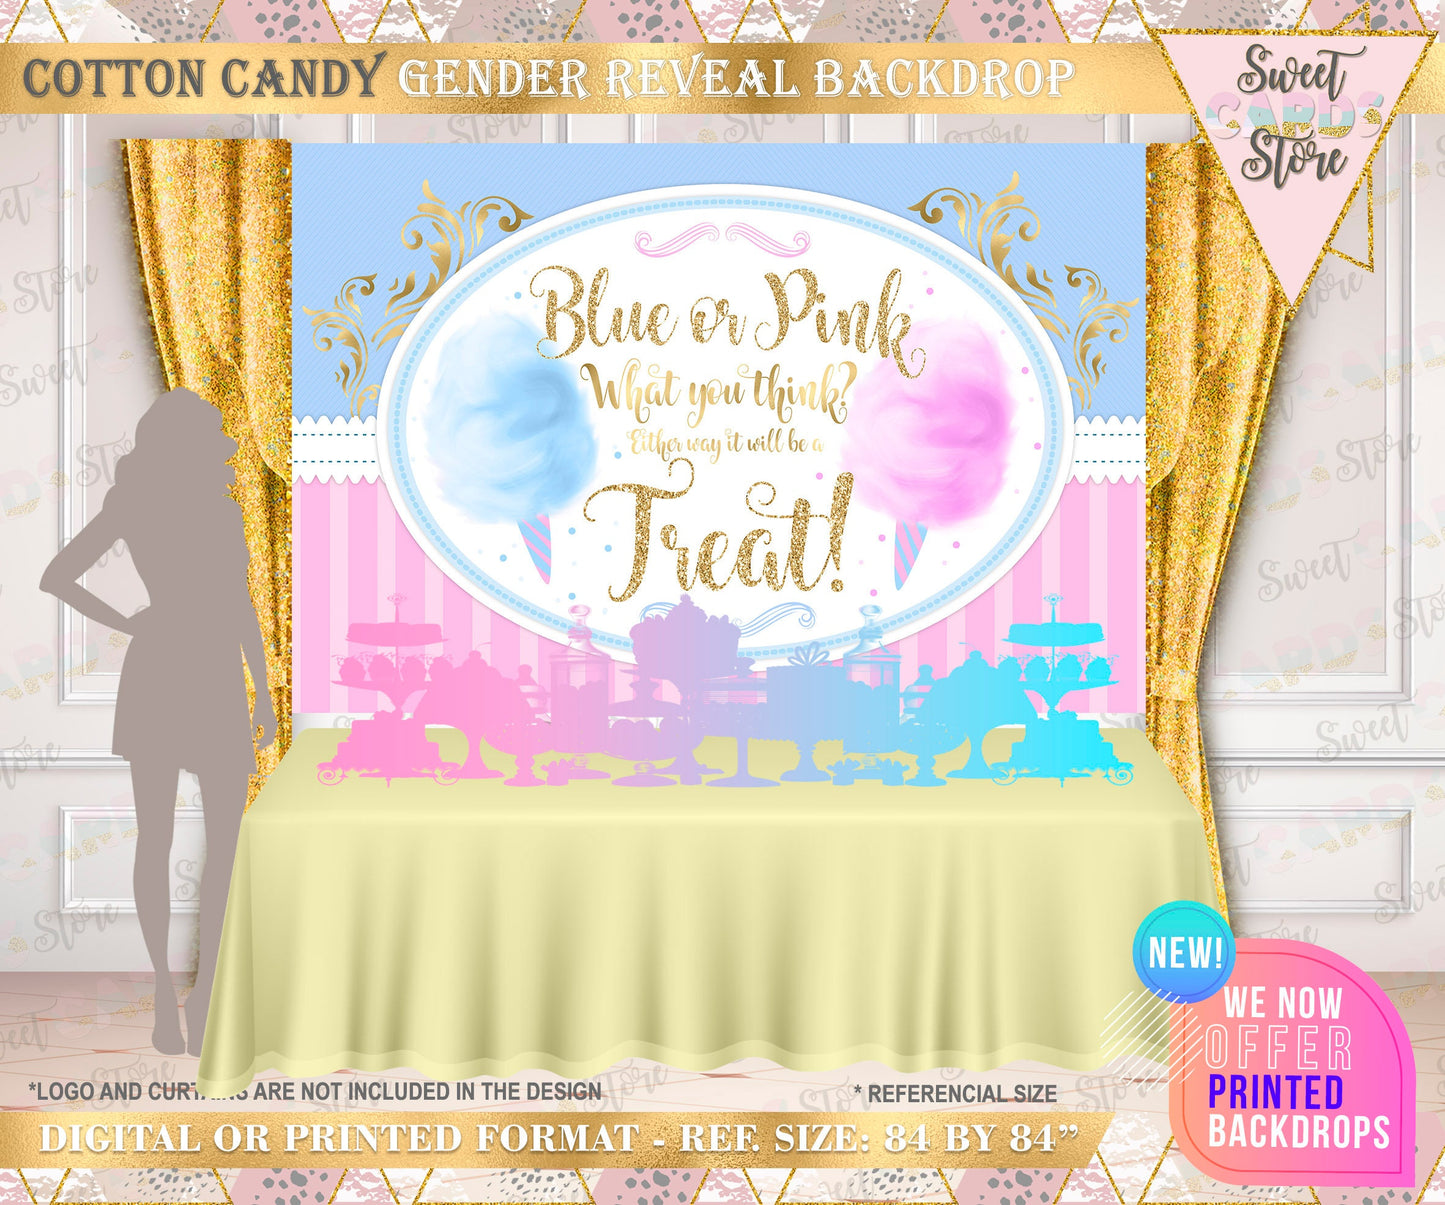 Cotton candy Gender Reveal Backdrop, Blue and Pink cotton candy gender reveal backdrop, Blue pink backdrop, gender reveal party banner decor